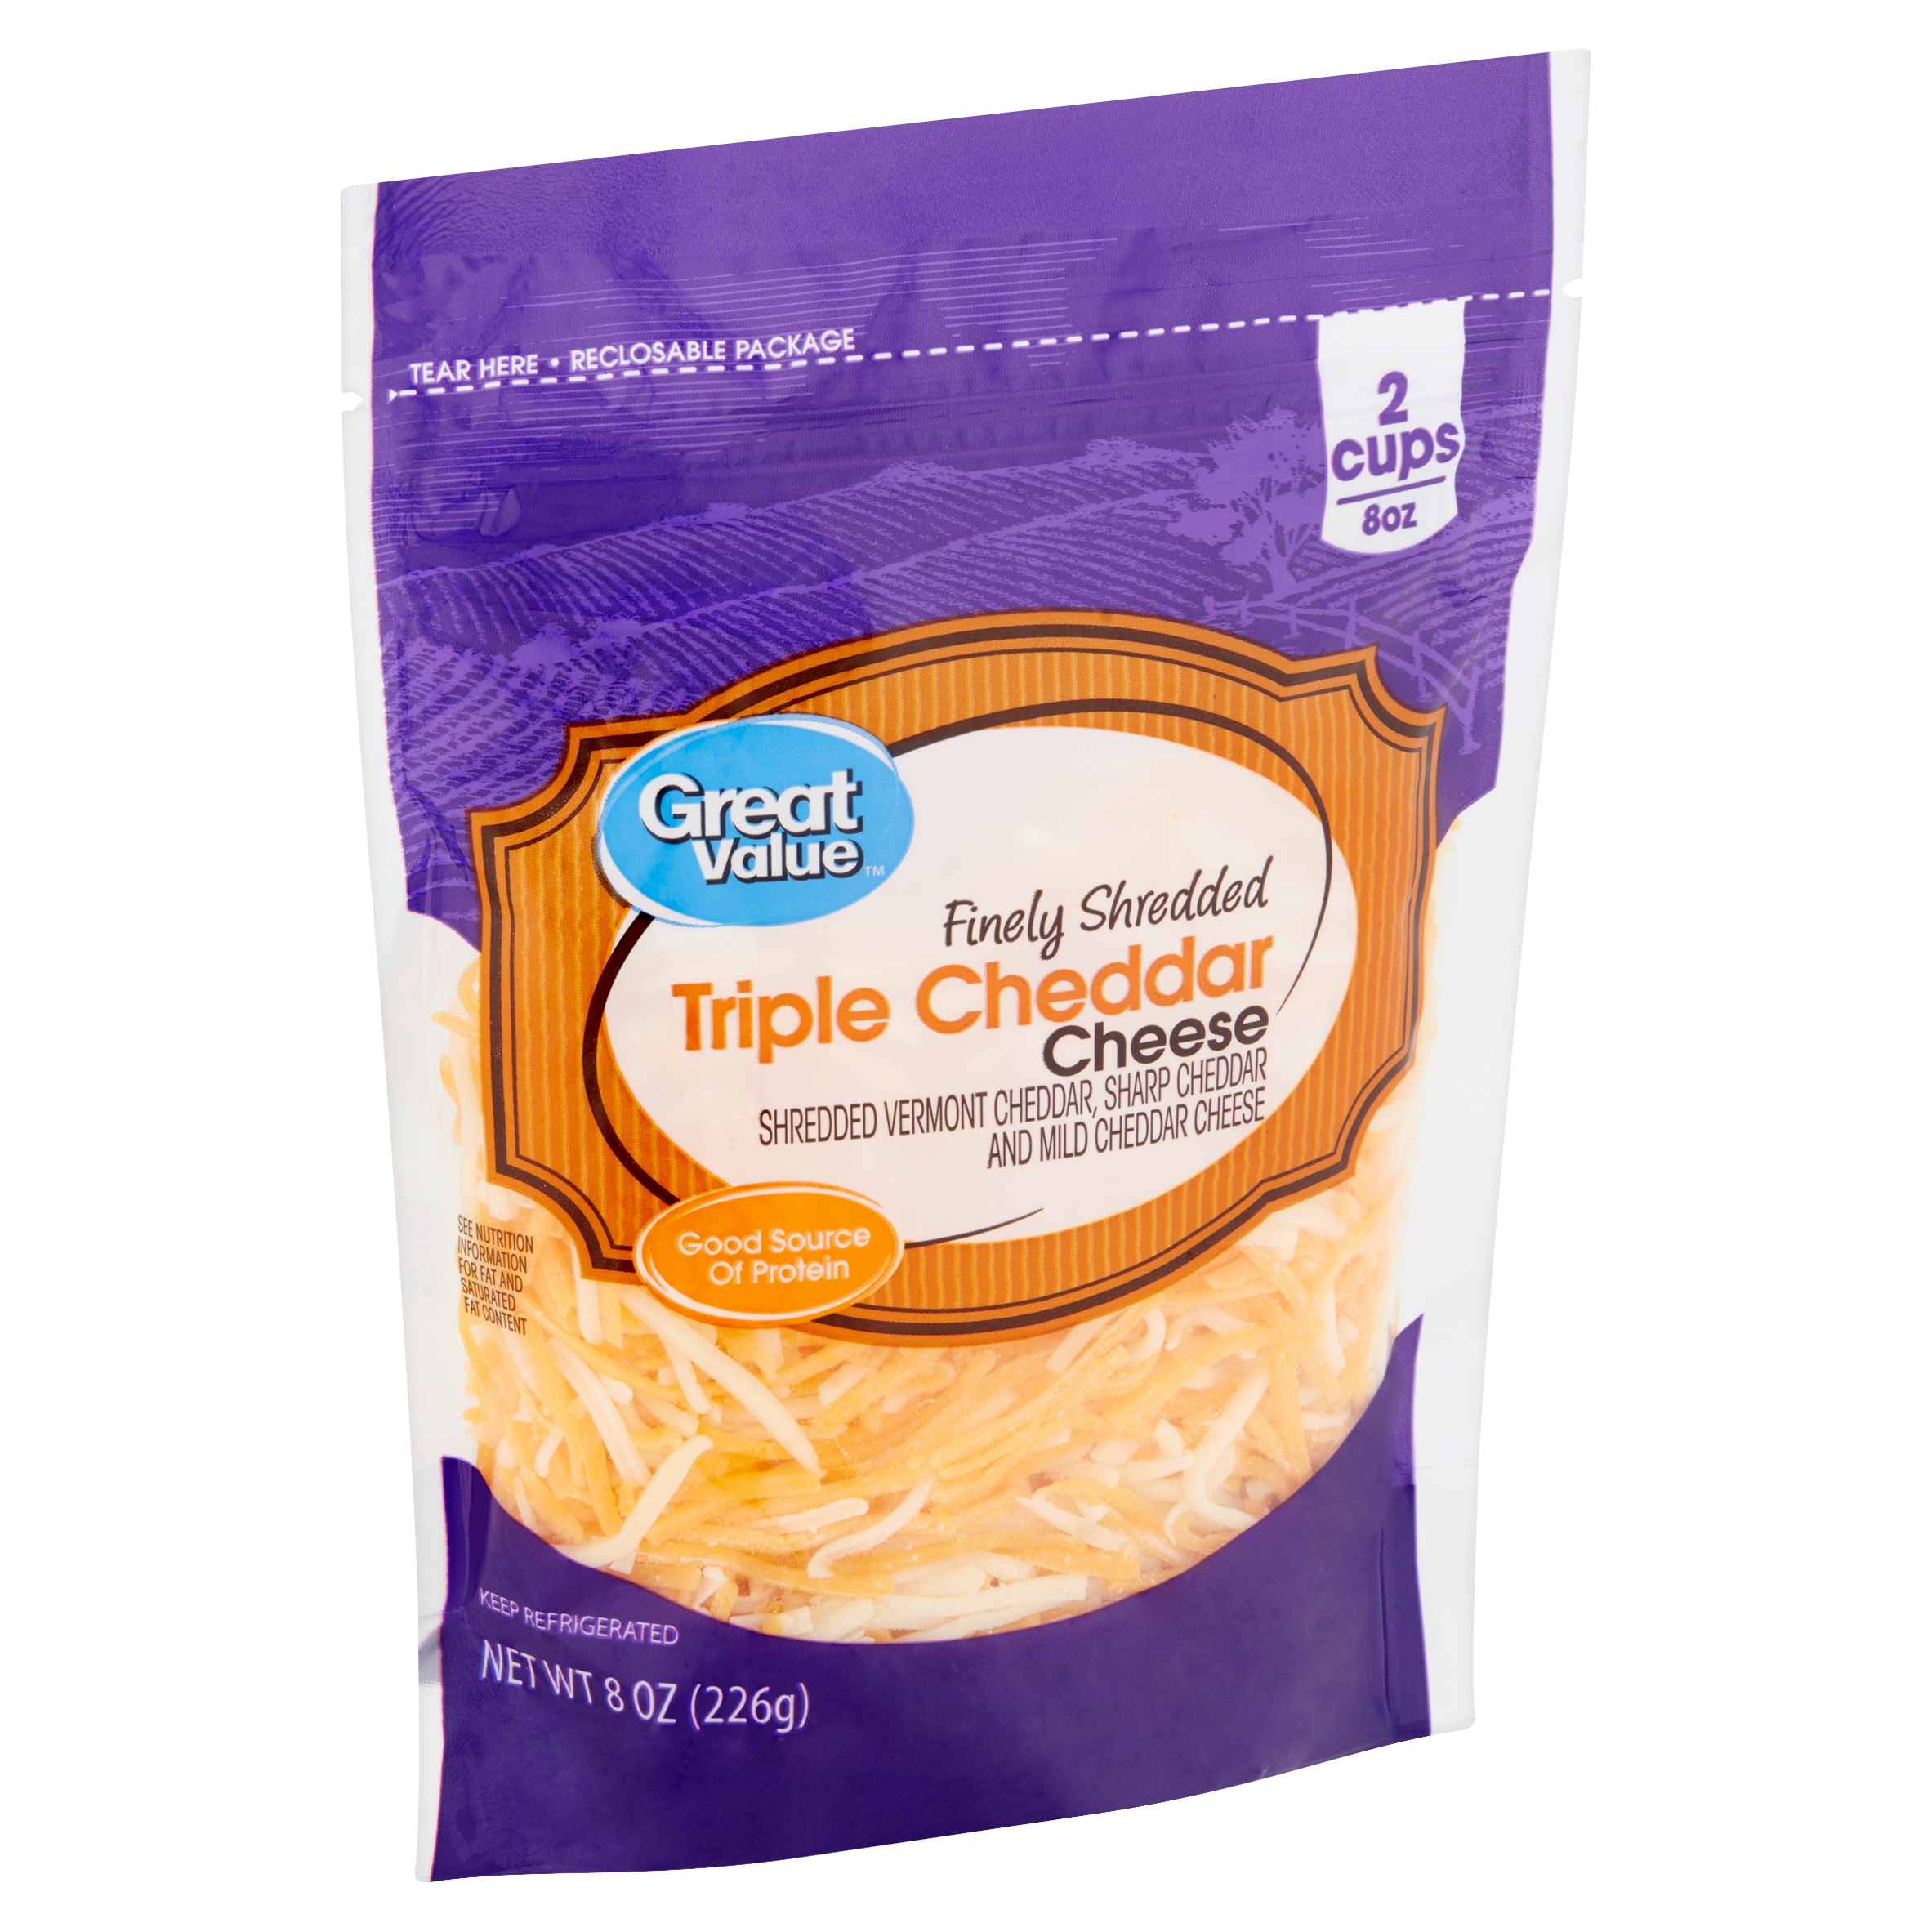 Great Value Finely Shredded Triple Cheddar Cheese, 8 Oz Image